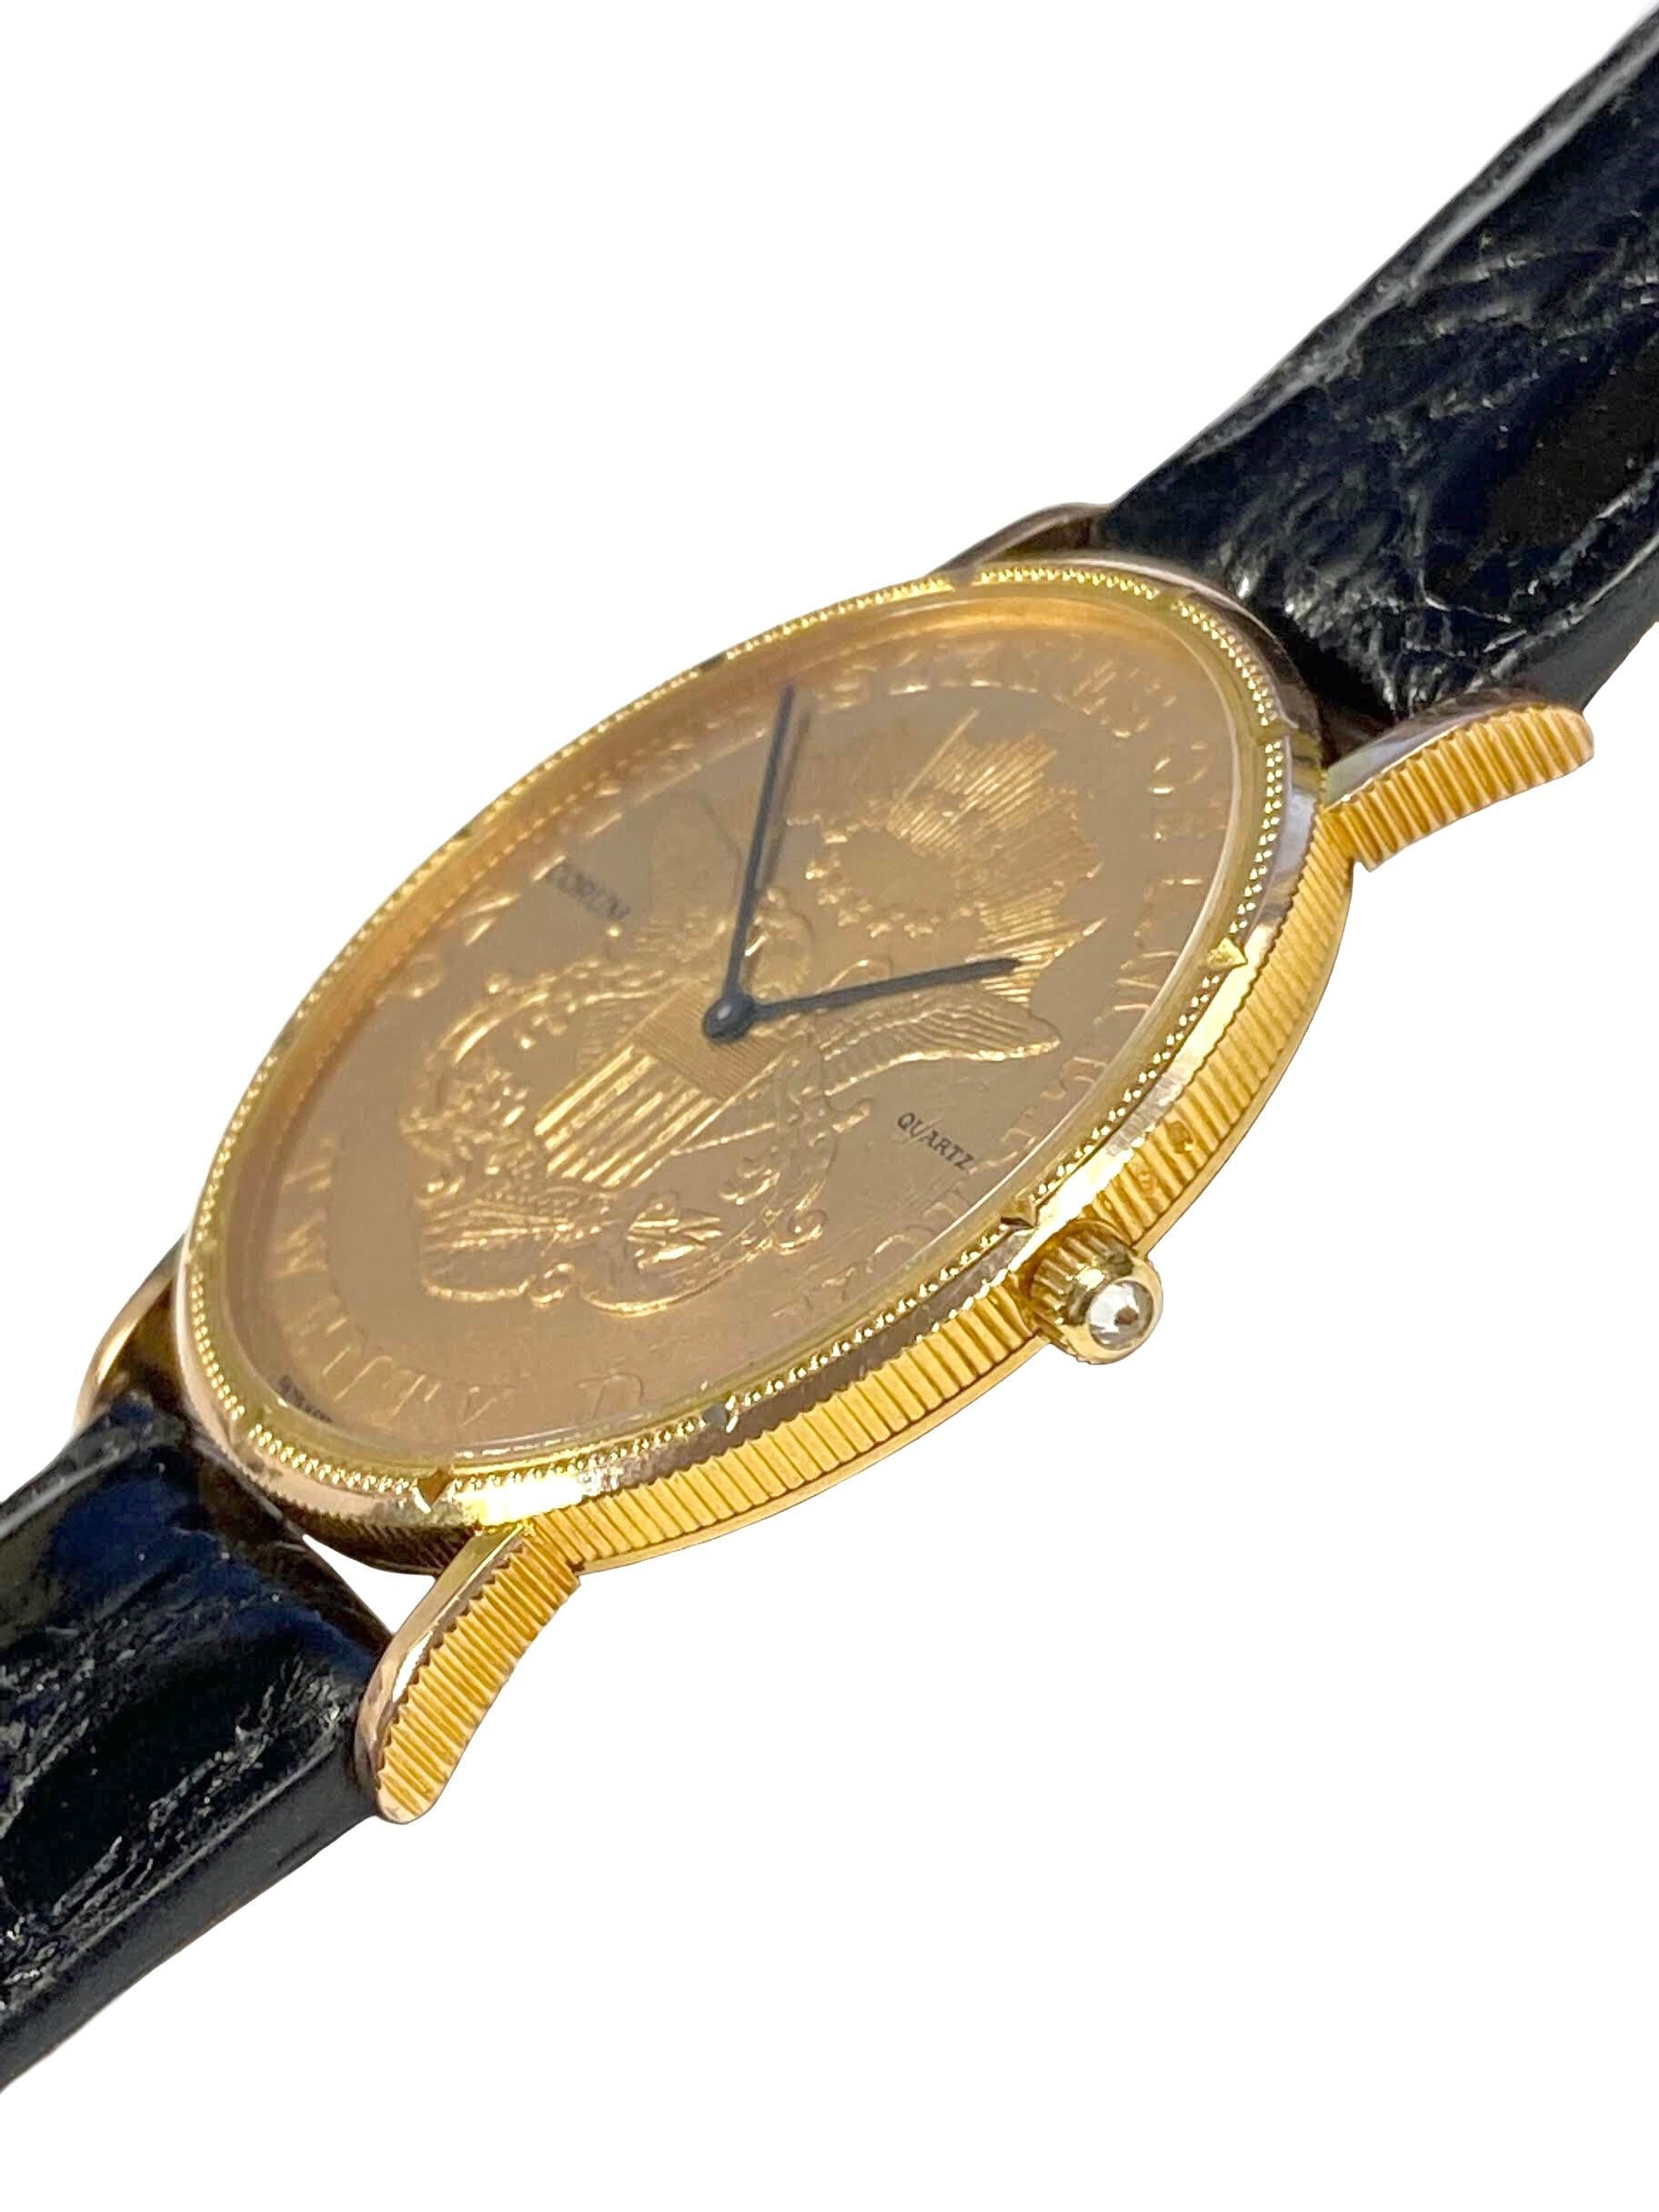 Circa 1990 Corum  U.S. $20 Gold Coin Wrist Watch, made from 2  1891 22k Gold $20 Gold coins, 35 M.M. 2 piece case with coin edge sides and coin edge bezel, Quartz movement. New Black padded Crocodile strap. Recently serviced and comes with a one